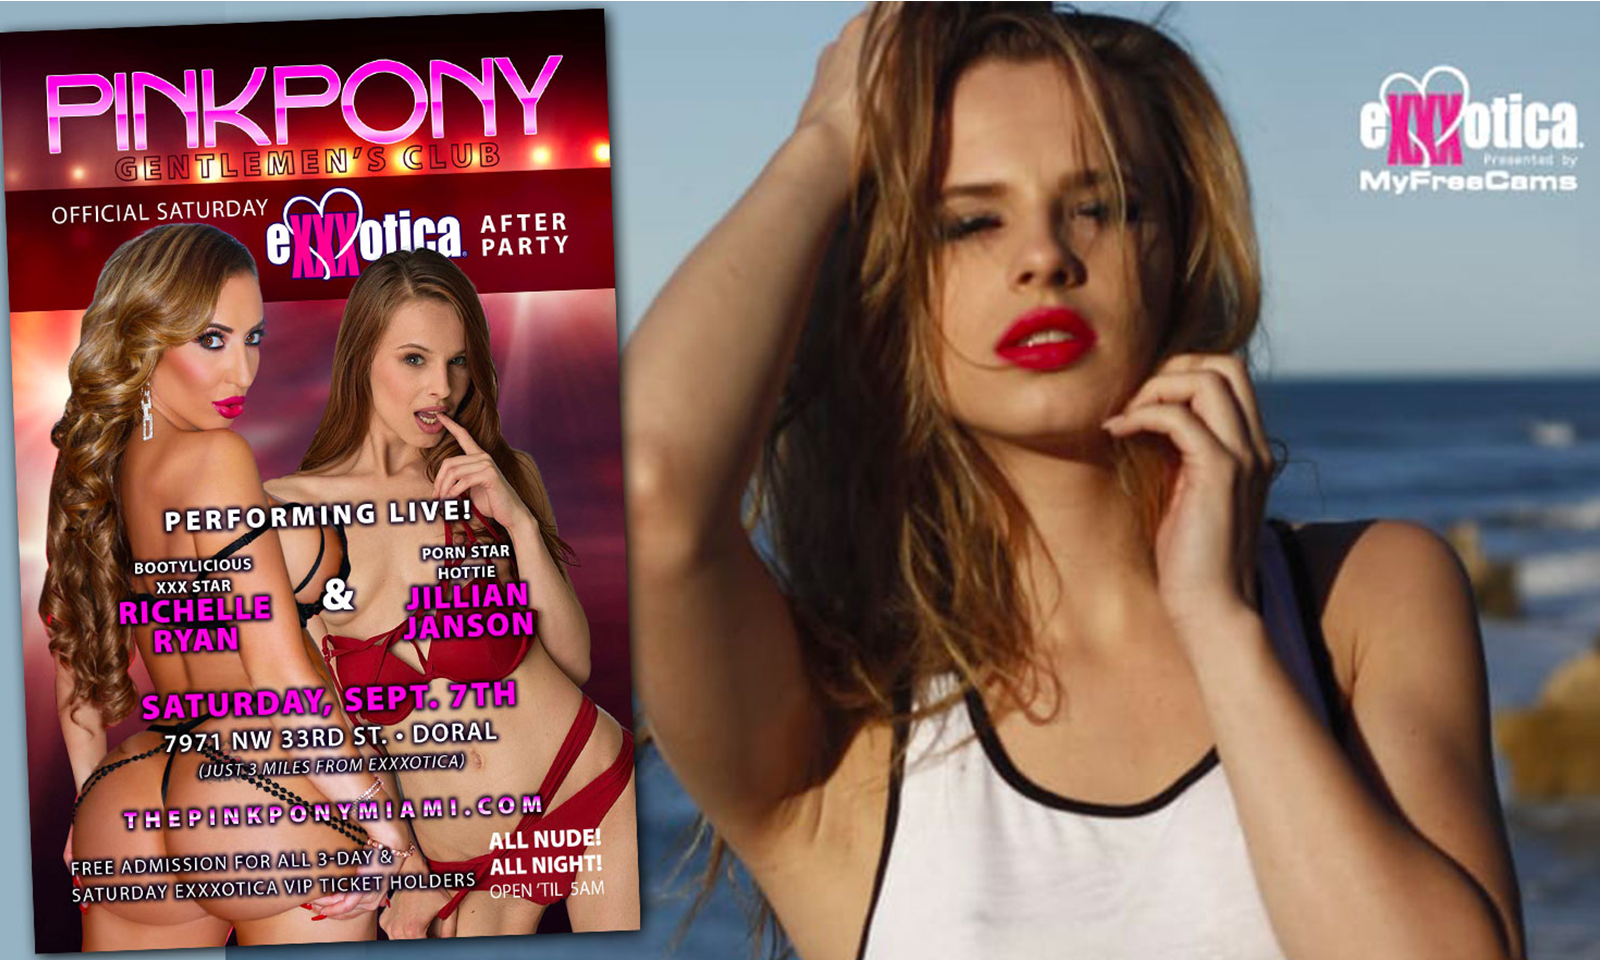 Jillian Janson to Sign at eXXXotica Miami, Dance at Pink Pony